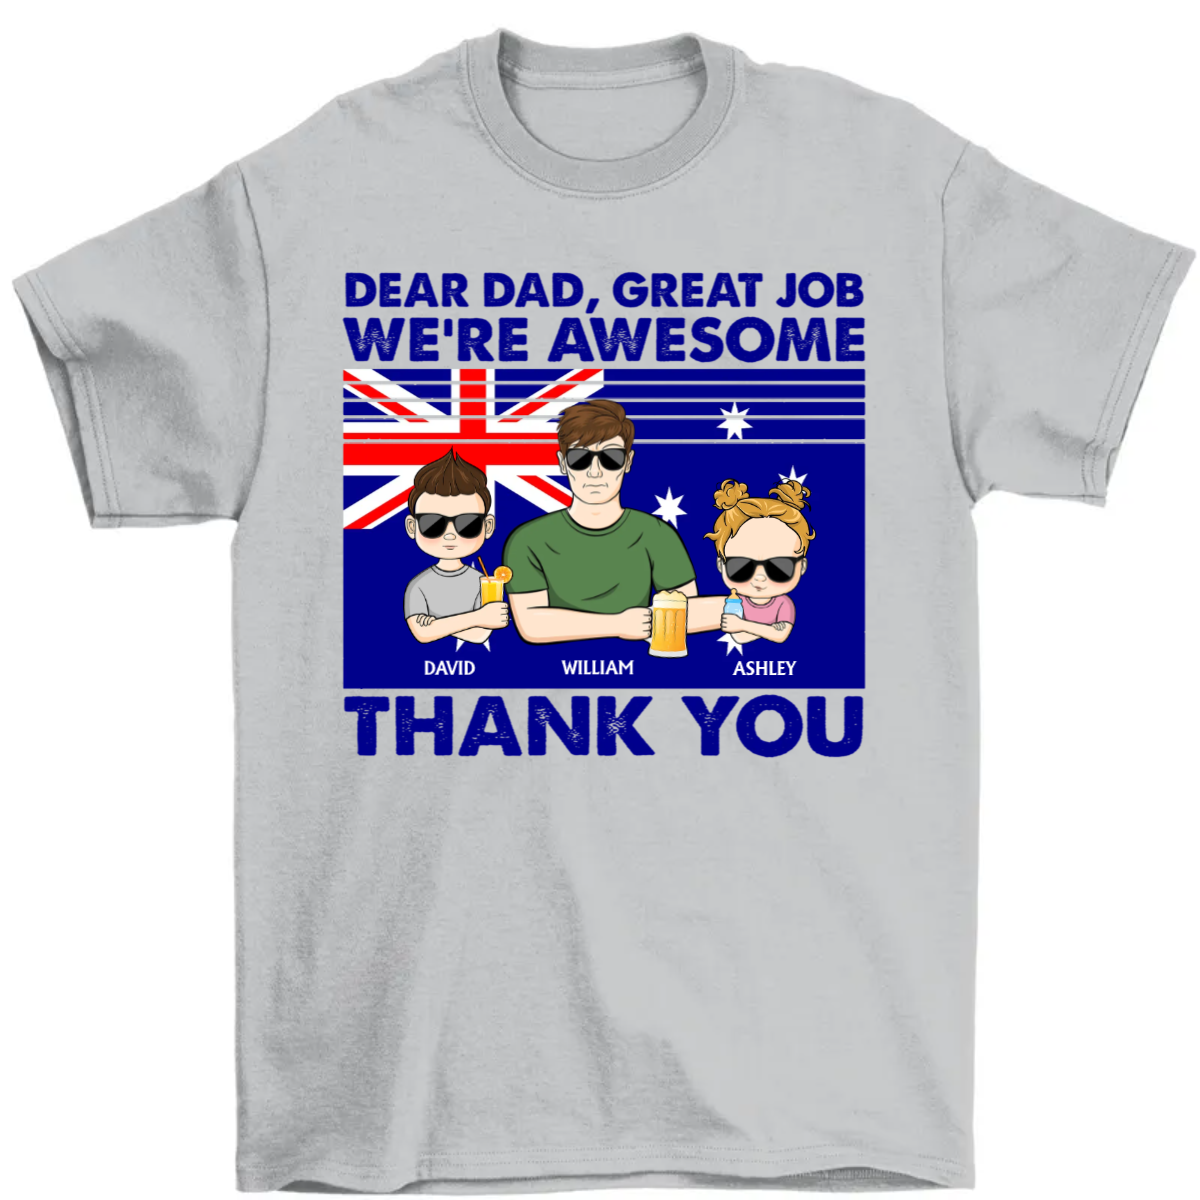 Dear Dad We're Awesome - Father Gift - Personalized Custom T-Shirt